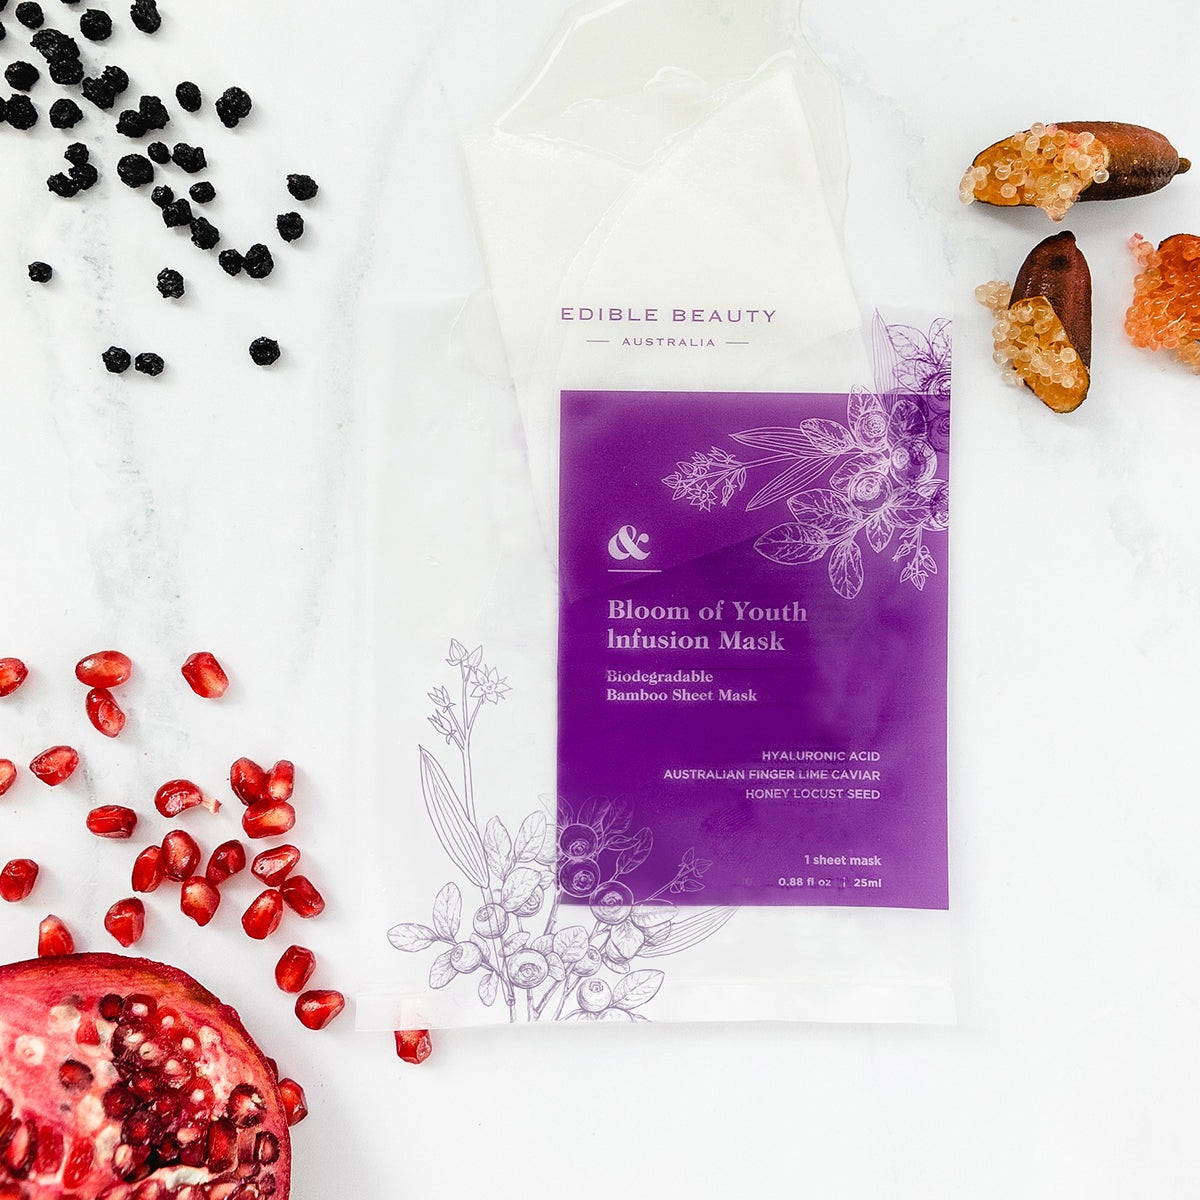 Edible Beauty Australia Bloom of Youth Infusion Mask - 5 masks